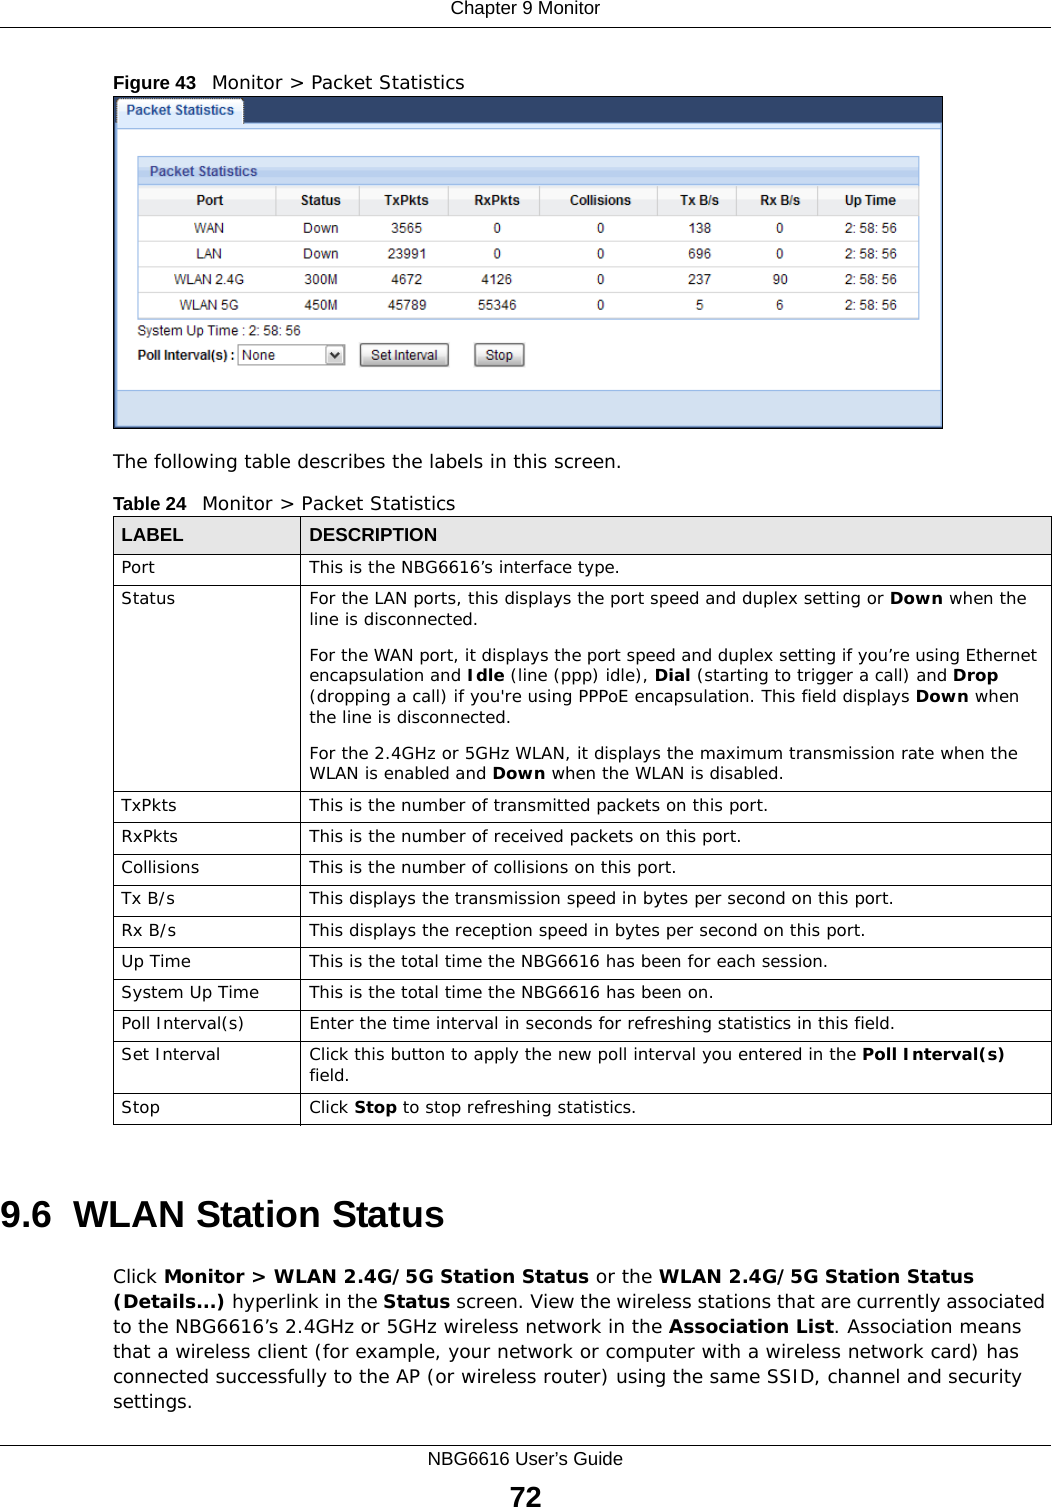 Chapter 9 MonitorNBG6616 User’s Guide72Figure 43   Monitor &gt; Packet Statistics The following table describes the labels in this screen.9.6  WLAN Station Status     Click Monitor &gt; WLAN 2.4G/5G Station Status or the WLAN 2.4G/5G Station Status (Details...) hyperlink in the Status screen. View the wireless stations that are currently associated to the NBG6616’s 2.4GHz or 5GHz wireless network in the Association List. Association means that a wireless client (for example, your network or computer with a wireless network card) has connected successfully to the AP (or wireless router) using the same SSID, channel and security settings.Table 24   Monitor &gt; Packet StatisticsLABEL DESCRIPTIONPort This is the NBG6616’s interface type.Status  For the LAN ports, this displays the port speed and duplex setting or Down when the line is disconnected.For the WAN port, it displays the port speed and duplex setting if you’re using Ethernet encapsulation and Idle (line (ppp) idle), Dial (starting to trigger a call) and Drop (dropping a call) if you&apos;re using PPPoE encapsulation. This field displays Down when the line is disconnected.For the 2.4GHz or 5GHz WLAN, it displays the maximum transmission rate when the WLAN is enabled and Down when the WLAN is disabled.TxPkts  This is the number of transmitted packets on this port.RxPkts  This is the number of received packets on this port.Collisions  This is the number of collisions on this port.Tx B/s  This displays the transmission speed in bytes per second on this port.Rx B/s This displays the reception speed in bytes per second on this port.Up Time This is the total time the NBG6616 has been for each session.System Up Time This is the total time the NBG6616 has been on.Poll Interval(s) Enter the time interval in seconds for refreshing statistics in this field.Set Interval Click this button to apply the new poll interval you entered in the Poll Interval(s) field.Stop Click Stop to stop refreshing statistics.